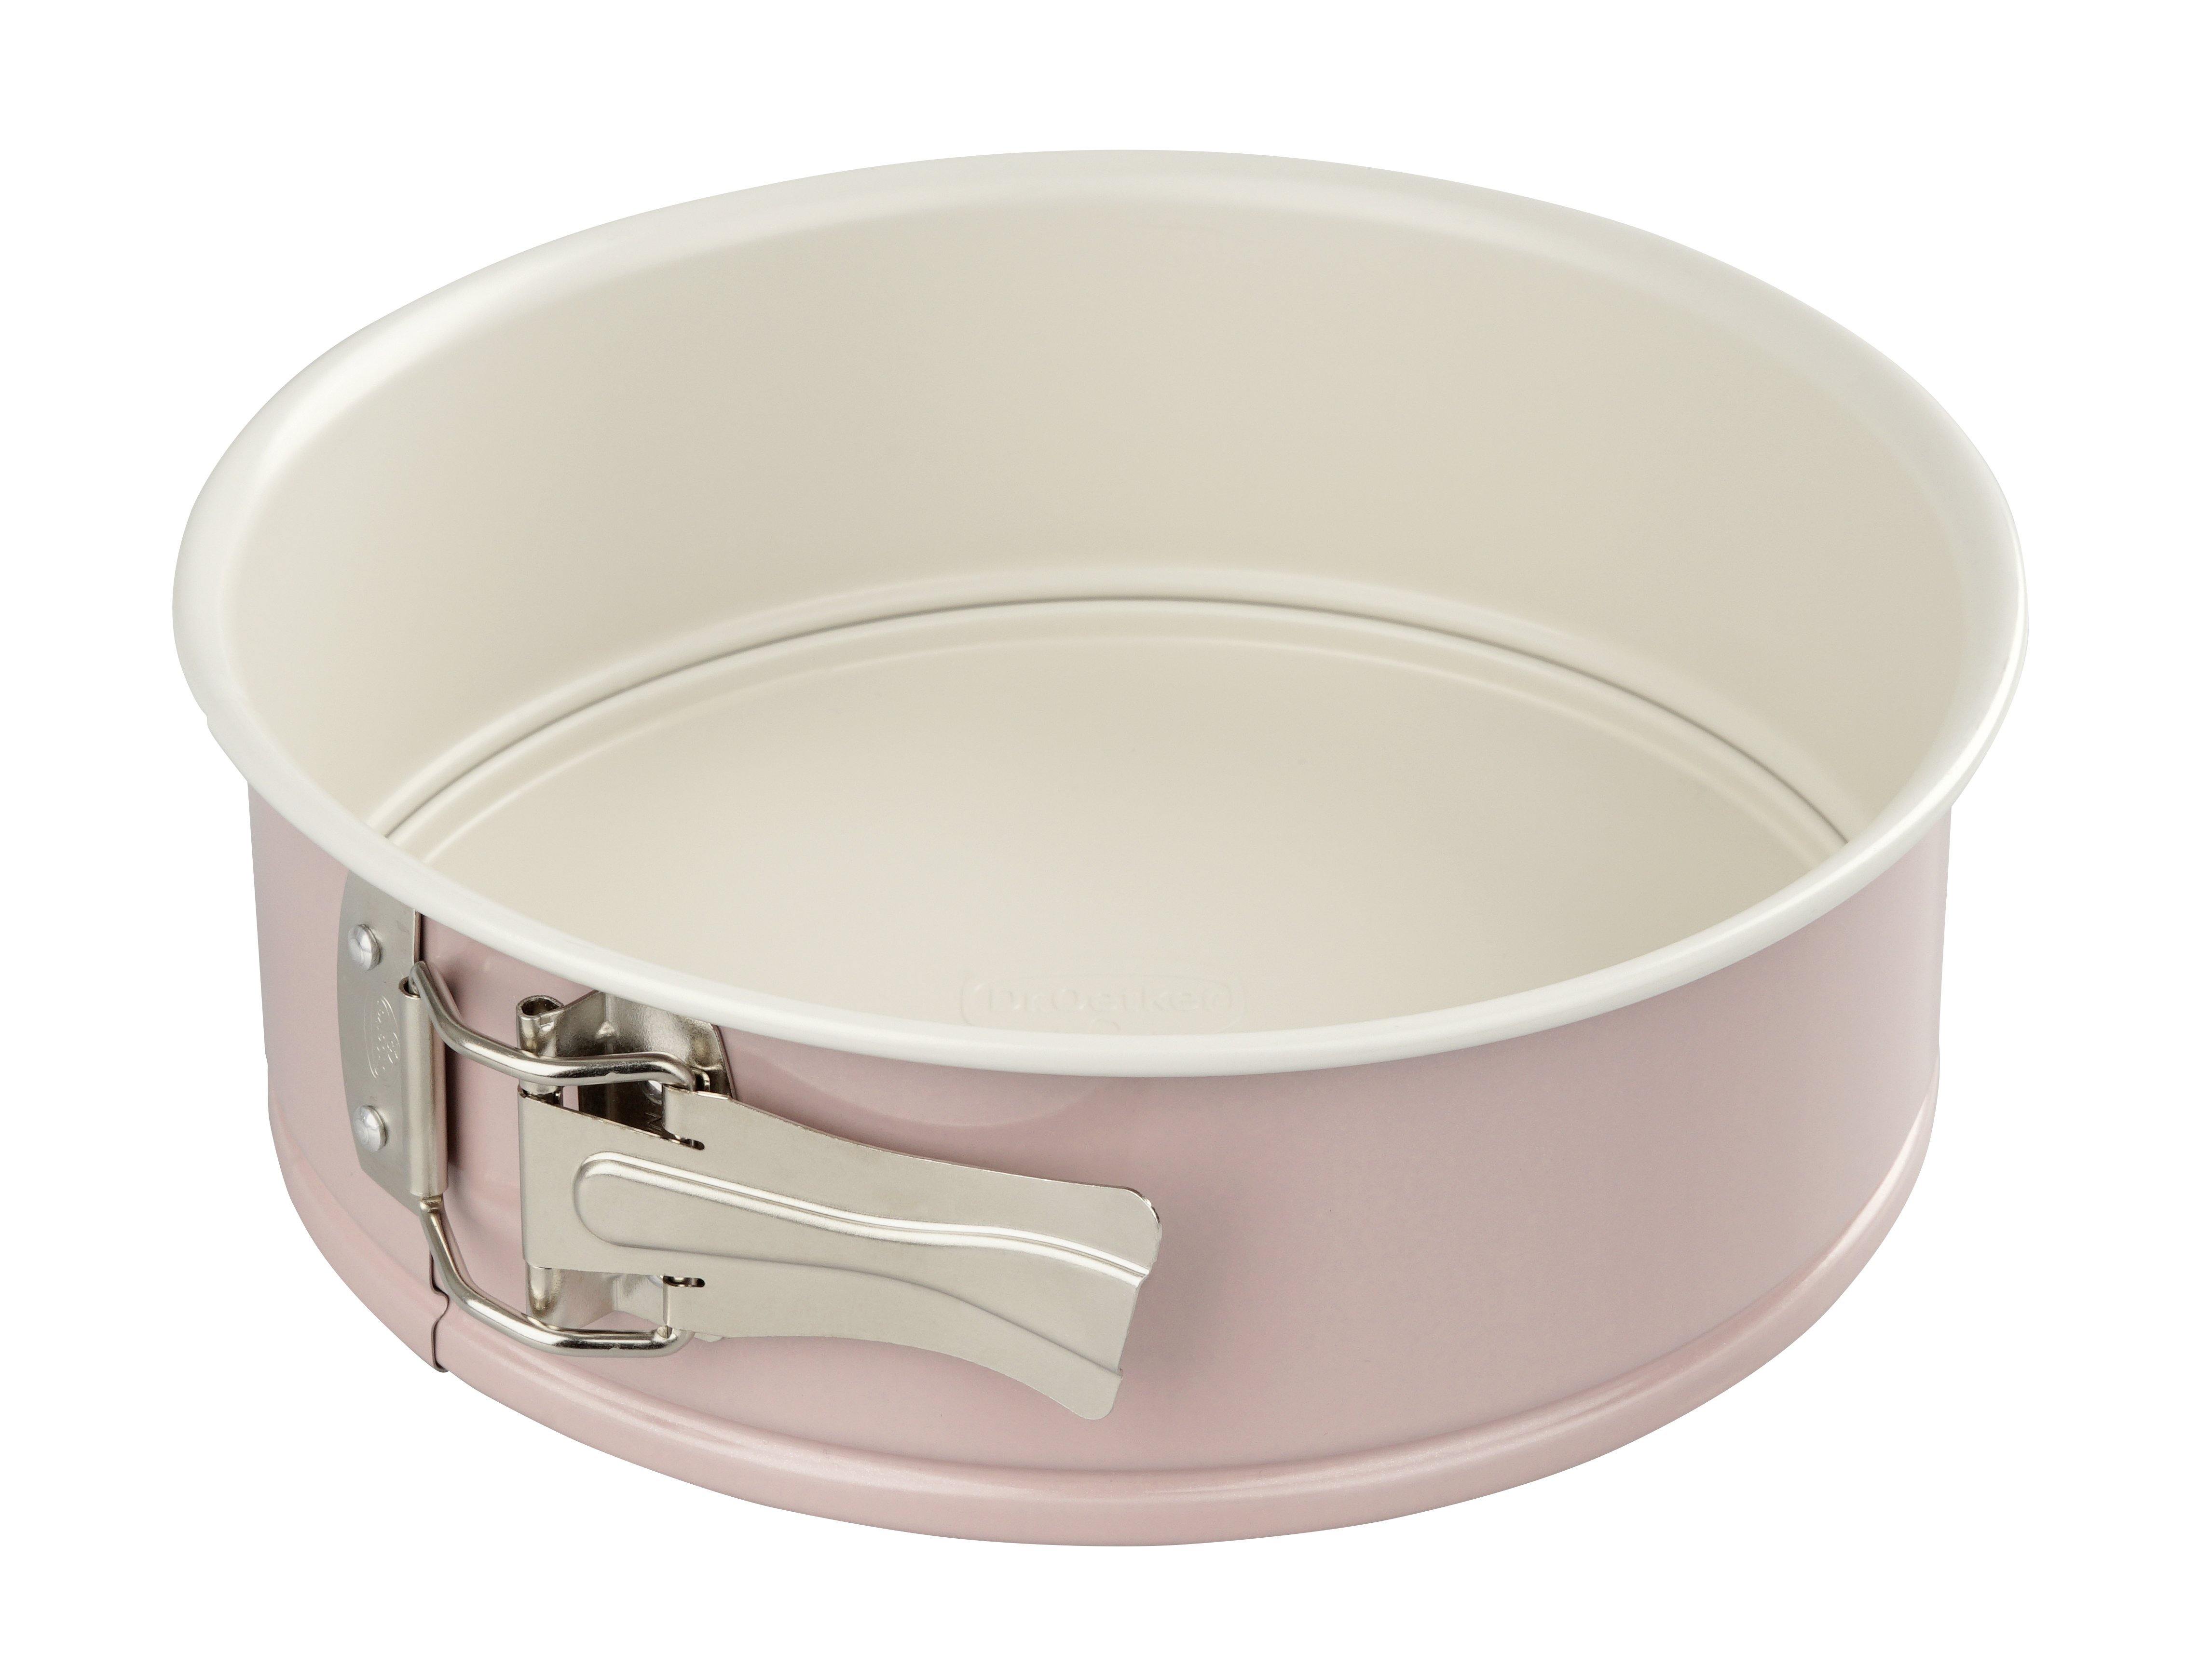 Dr. Oetker "Retro" Springform Steel Plate With Ceramic Reinforced Non-Stick Coating, Rose/CrÃ¨me, 20X7 Cm - Whole and All